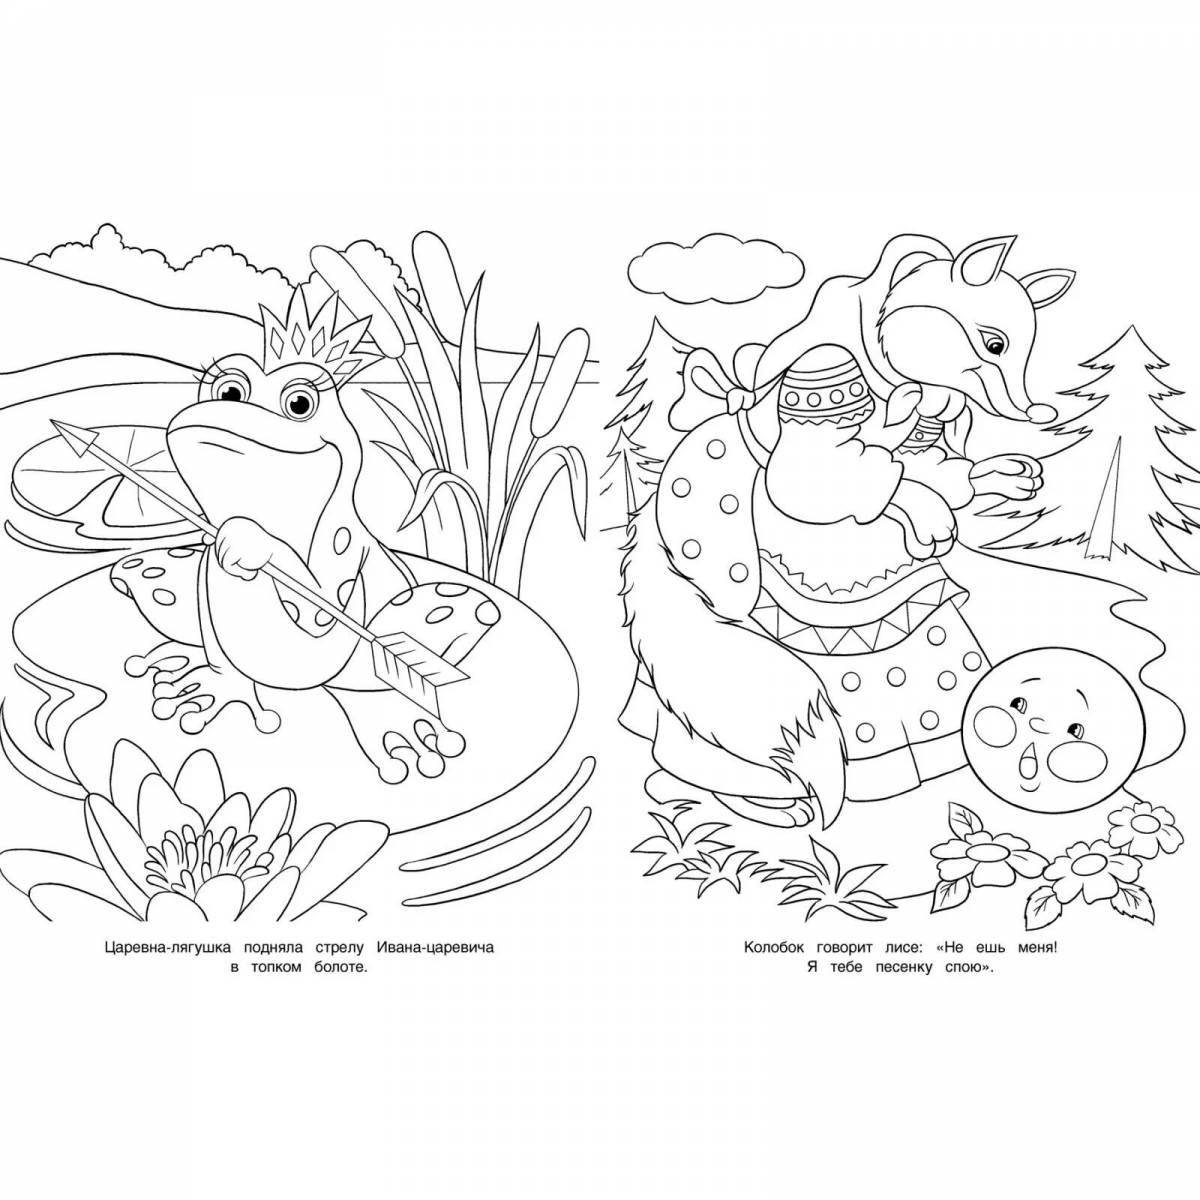 Innovative coloring book based on fairy tales